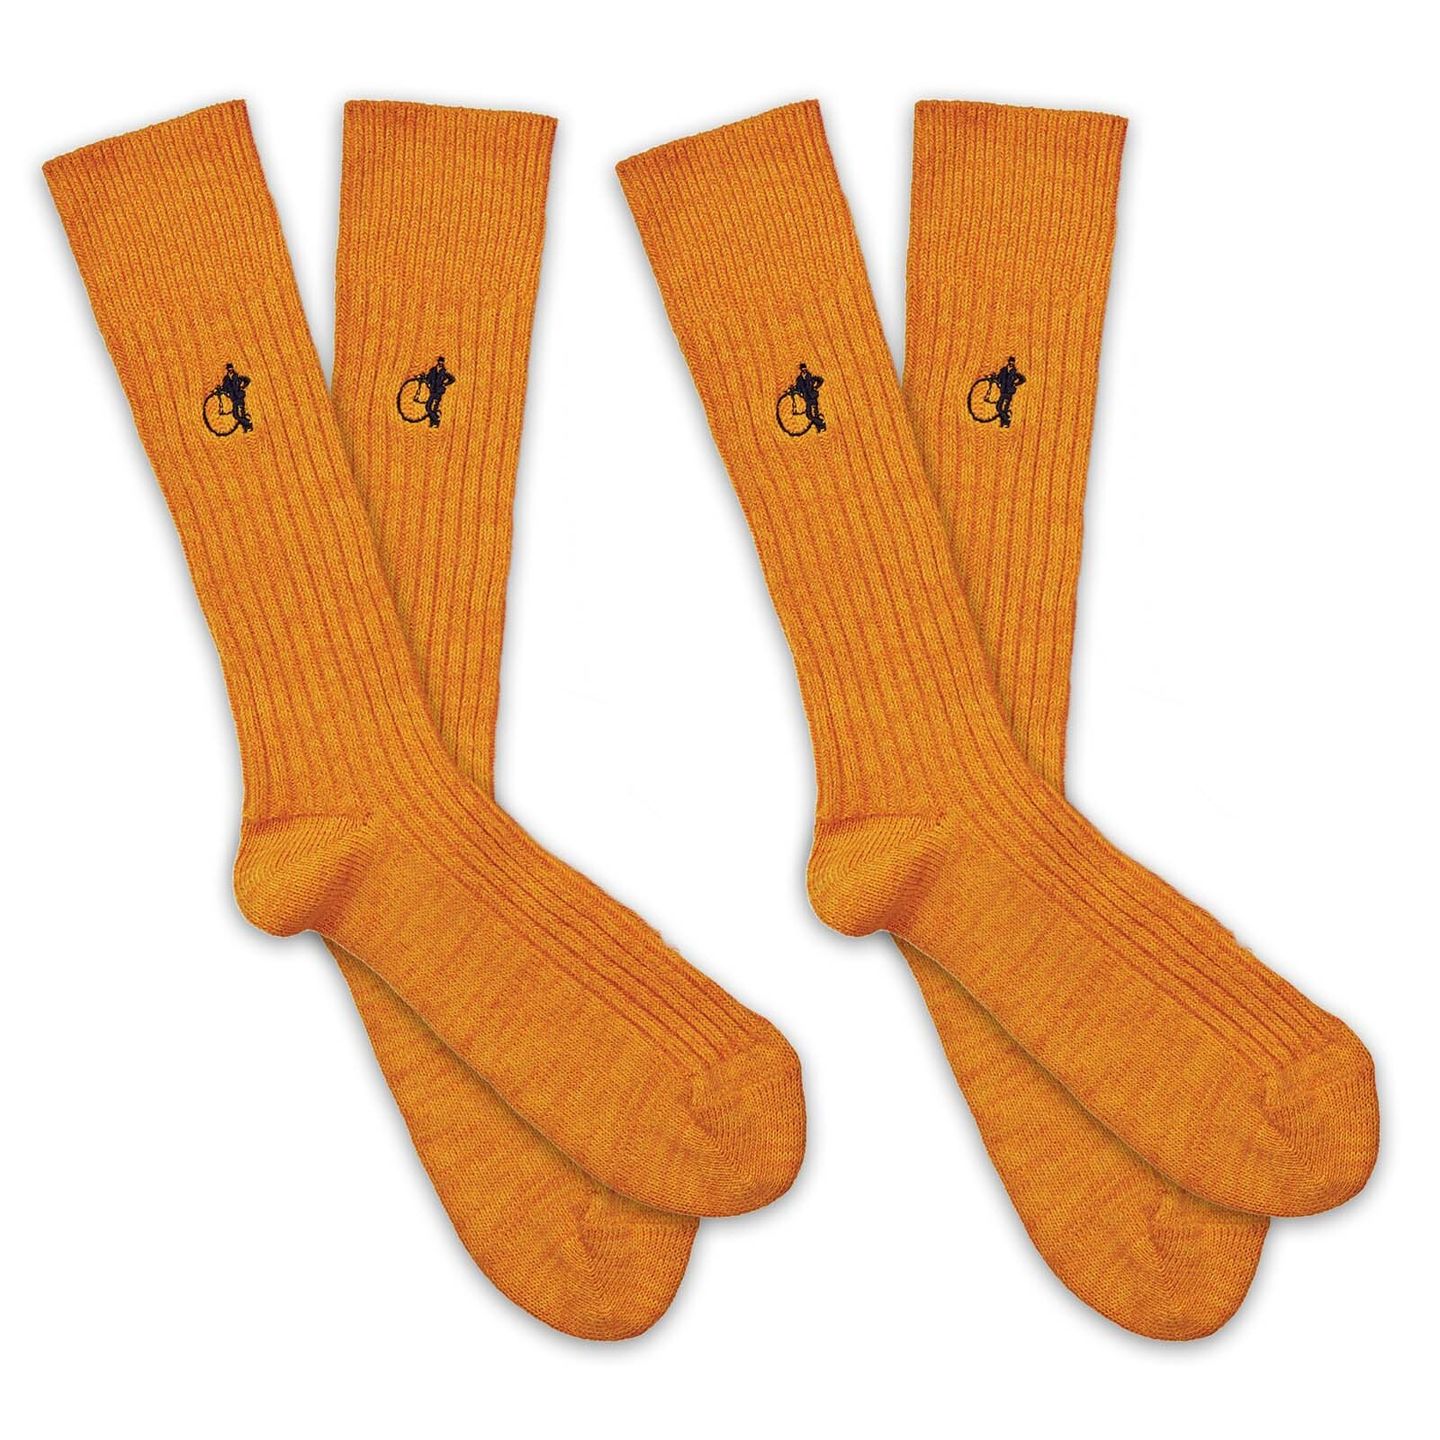 2 pair of orange socks with a white background